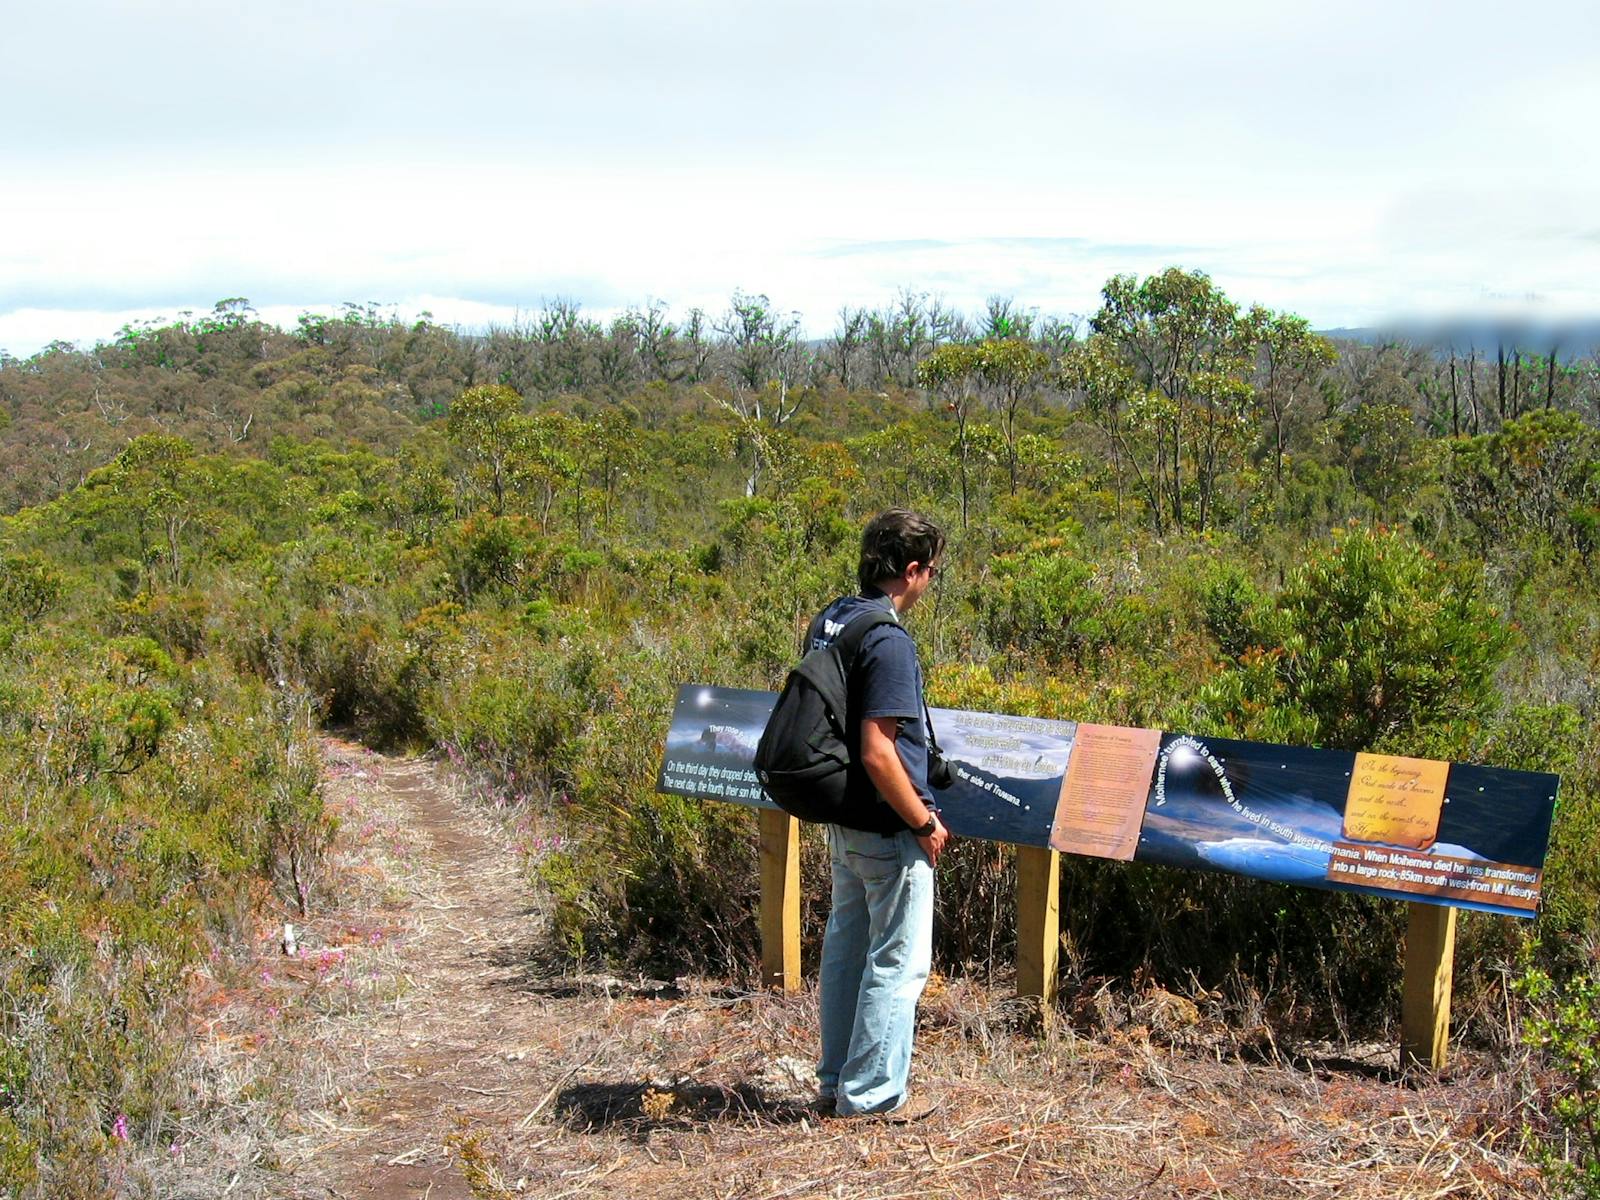 Aboriginal interpretive information panels are installed along the Mount Misery Track